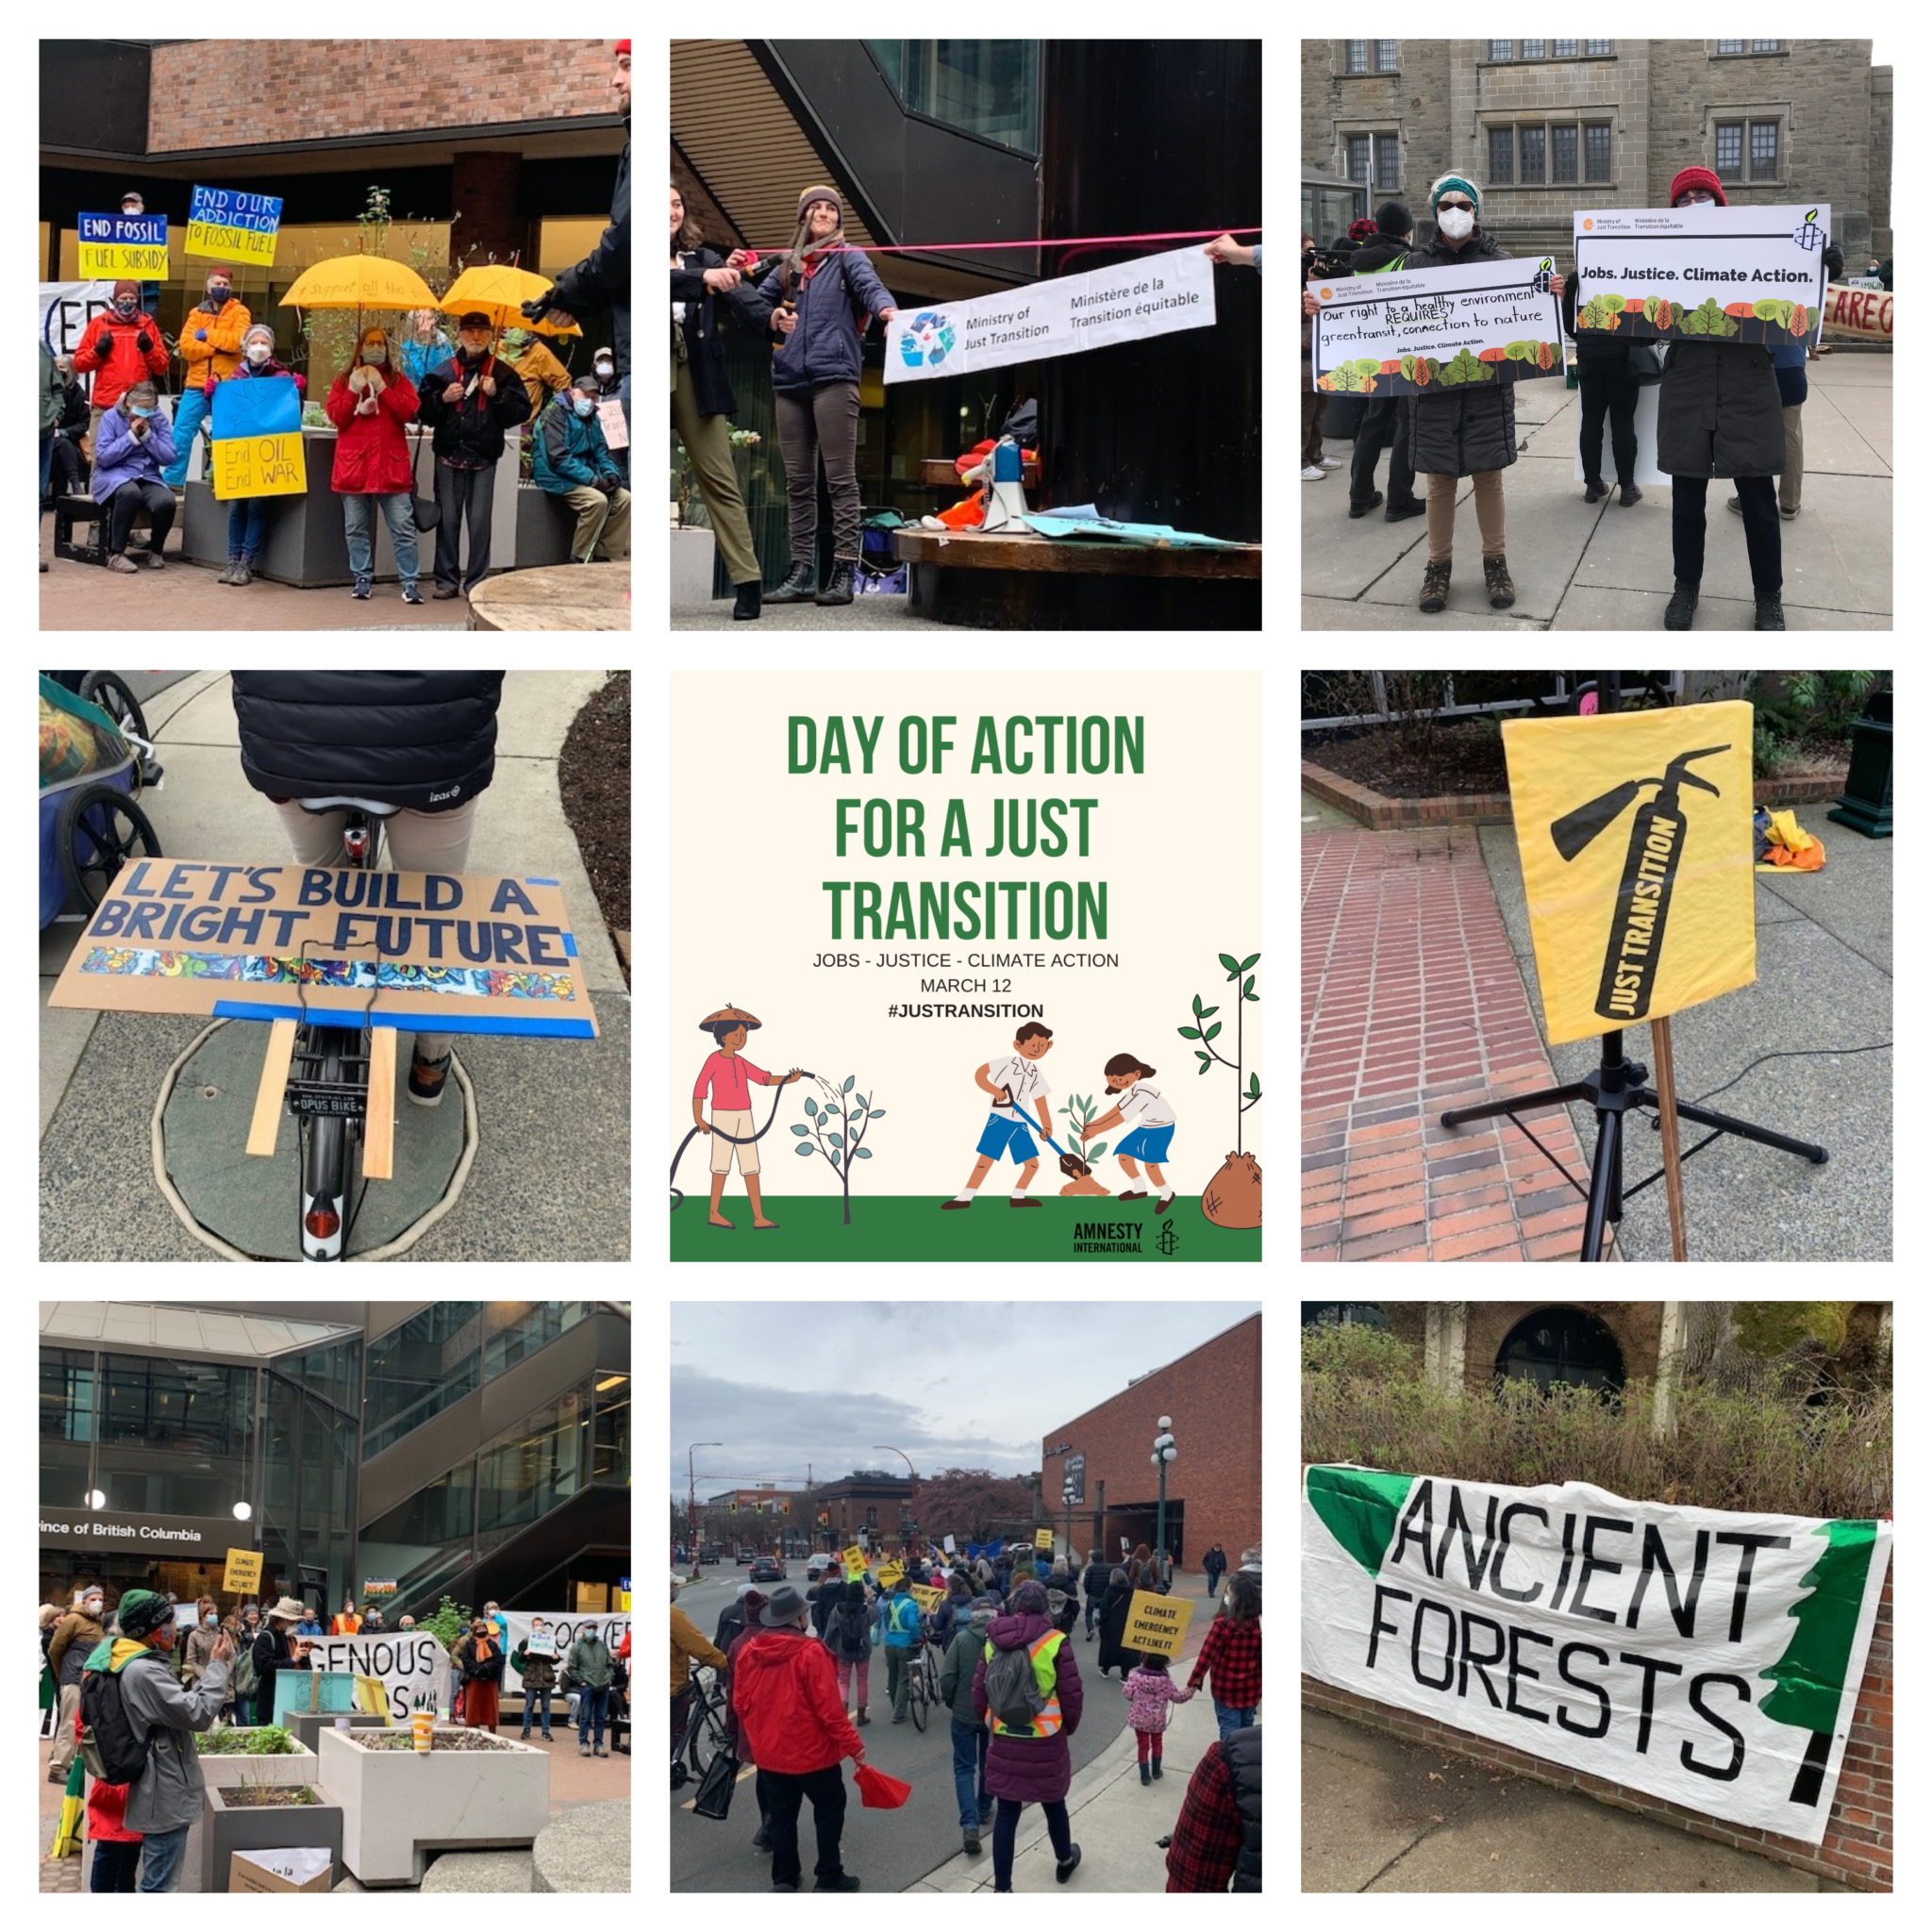 Collage of photos from events during March 12 Day of Action for a Just Transition. Banners, people with placards.